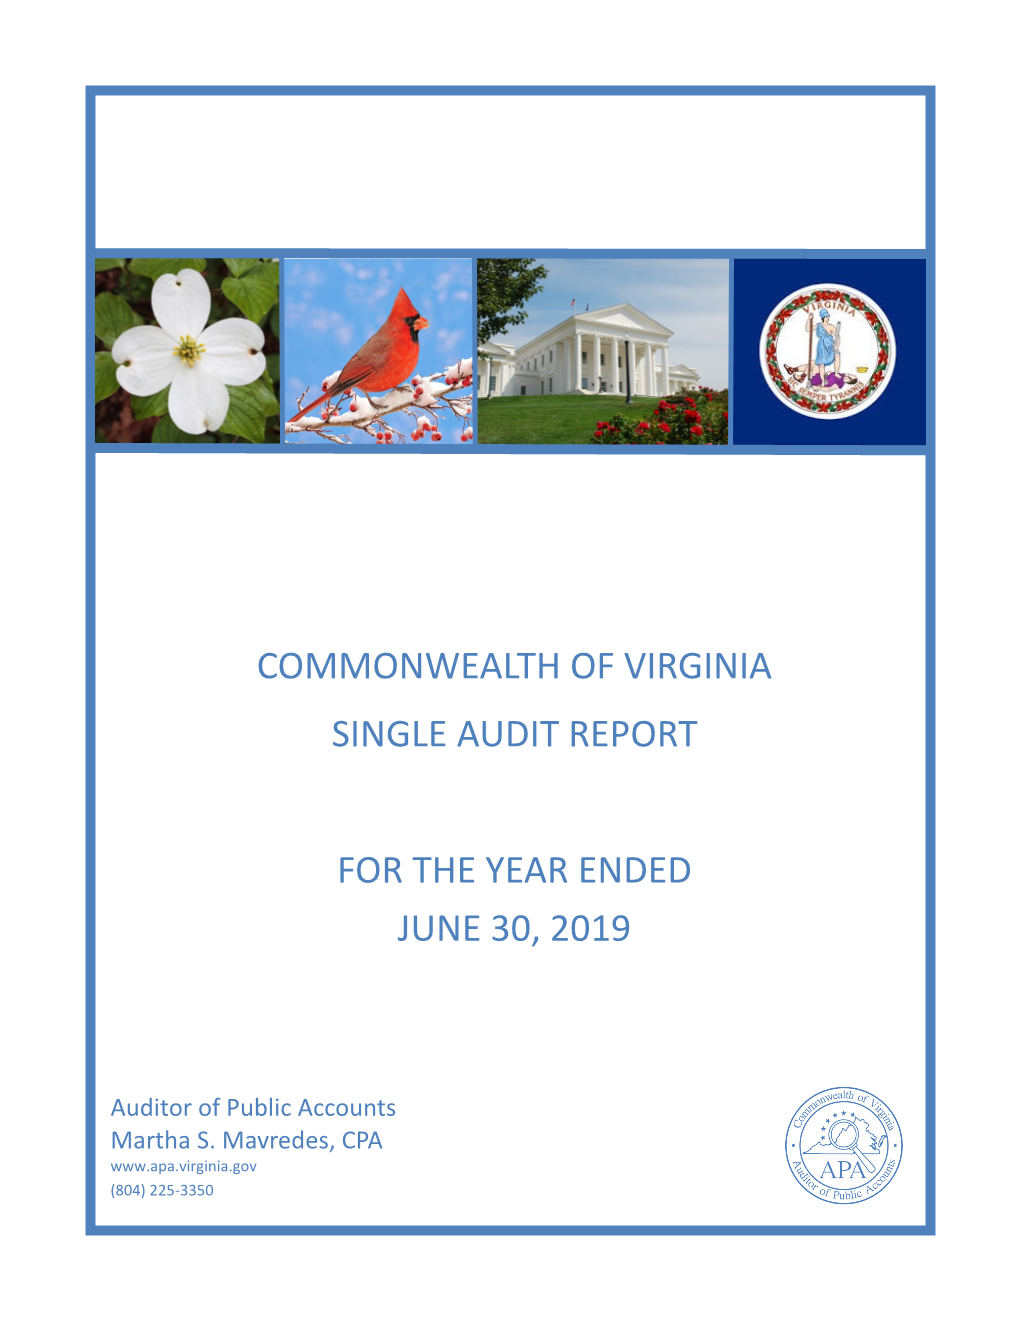 Commonwealth of Virginia Single Audit for the Year Ended June 30